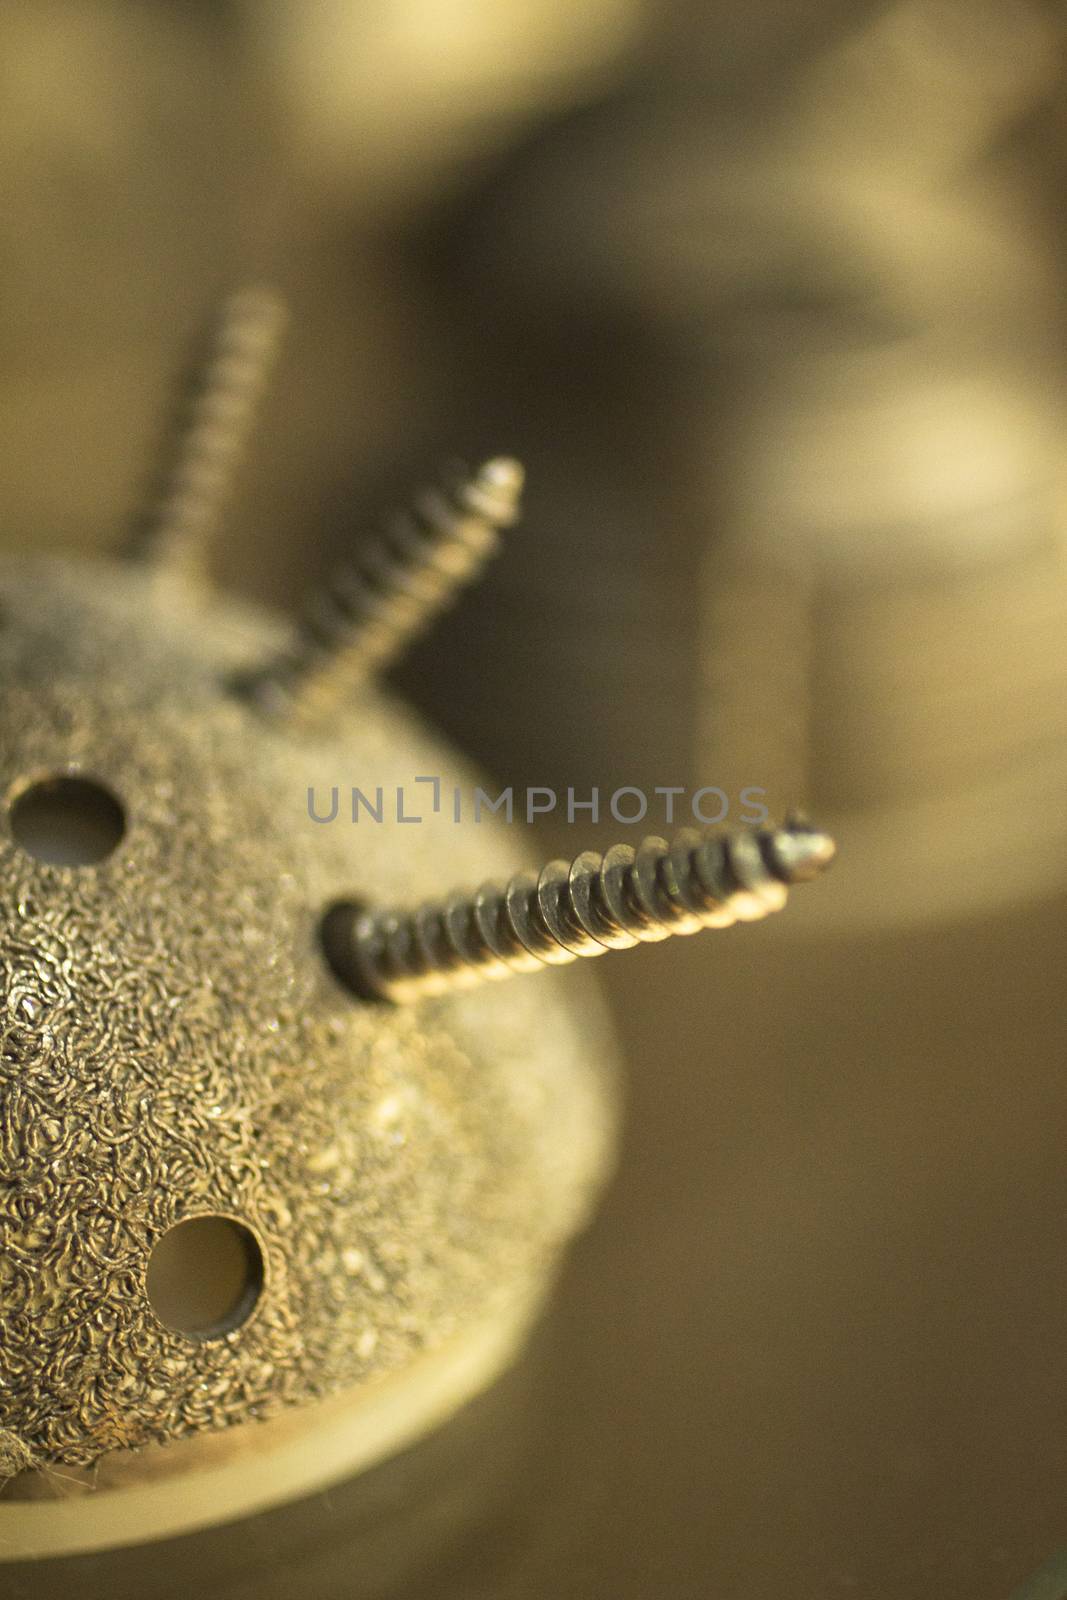 Closeup macro photograph of traumatology and orthopedic surgery metal hip ball joint implant with screw holes and screws against plain beige background defocused. 